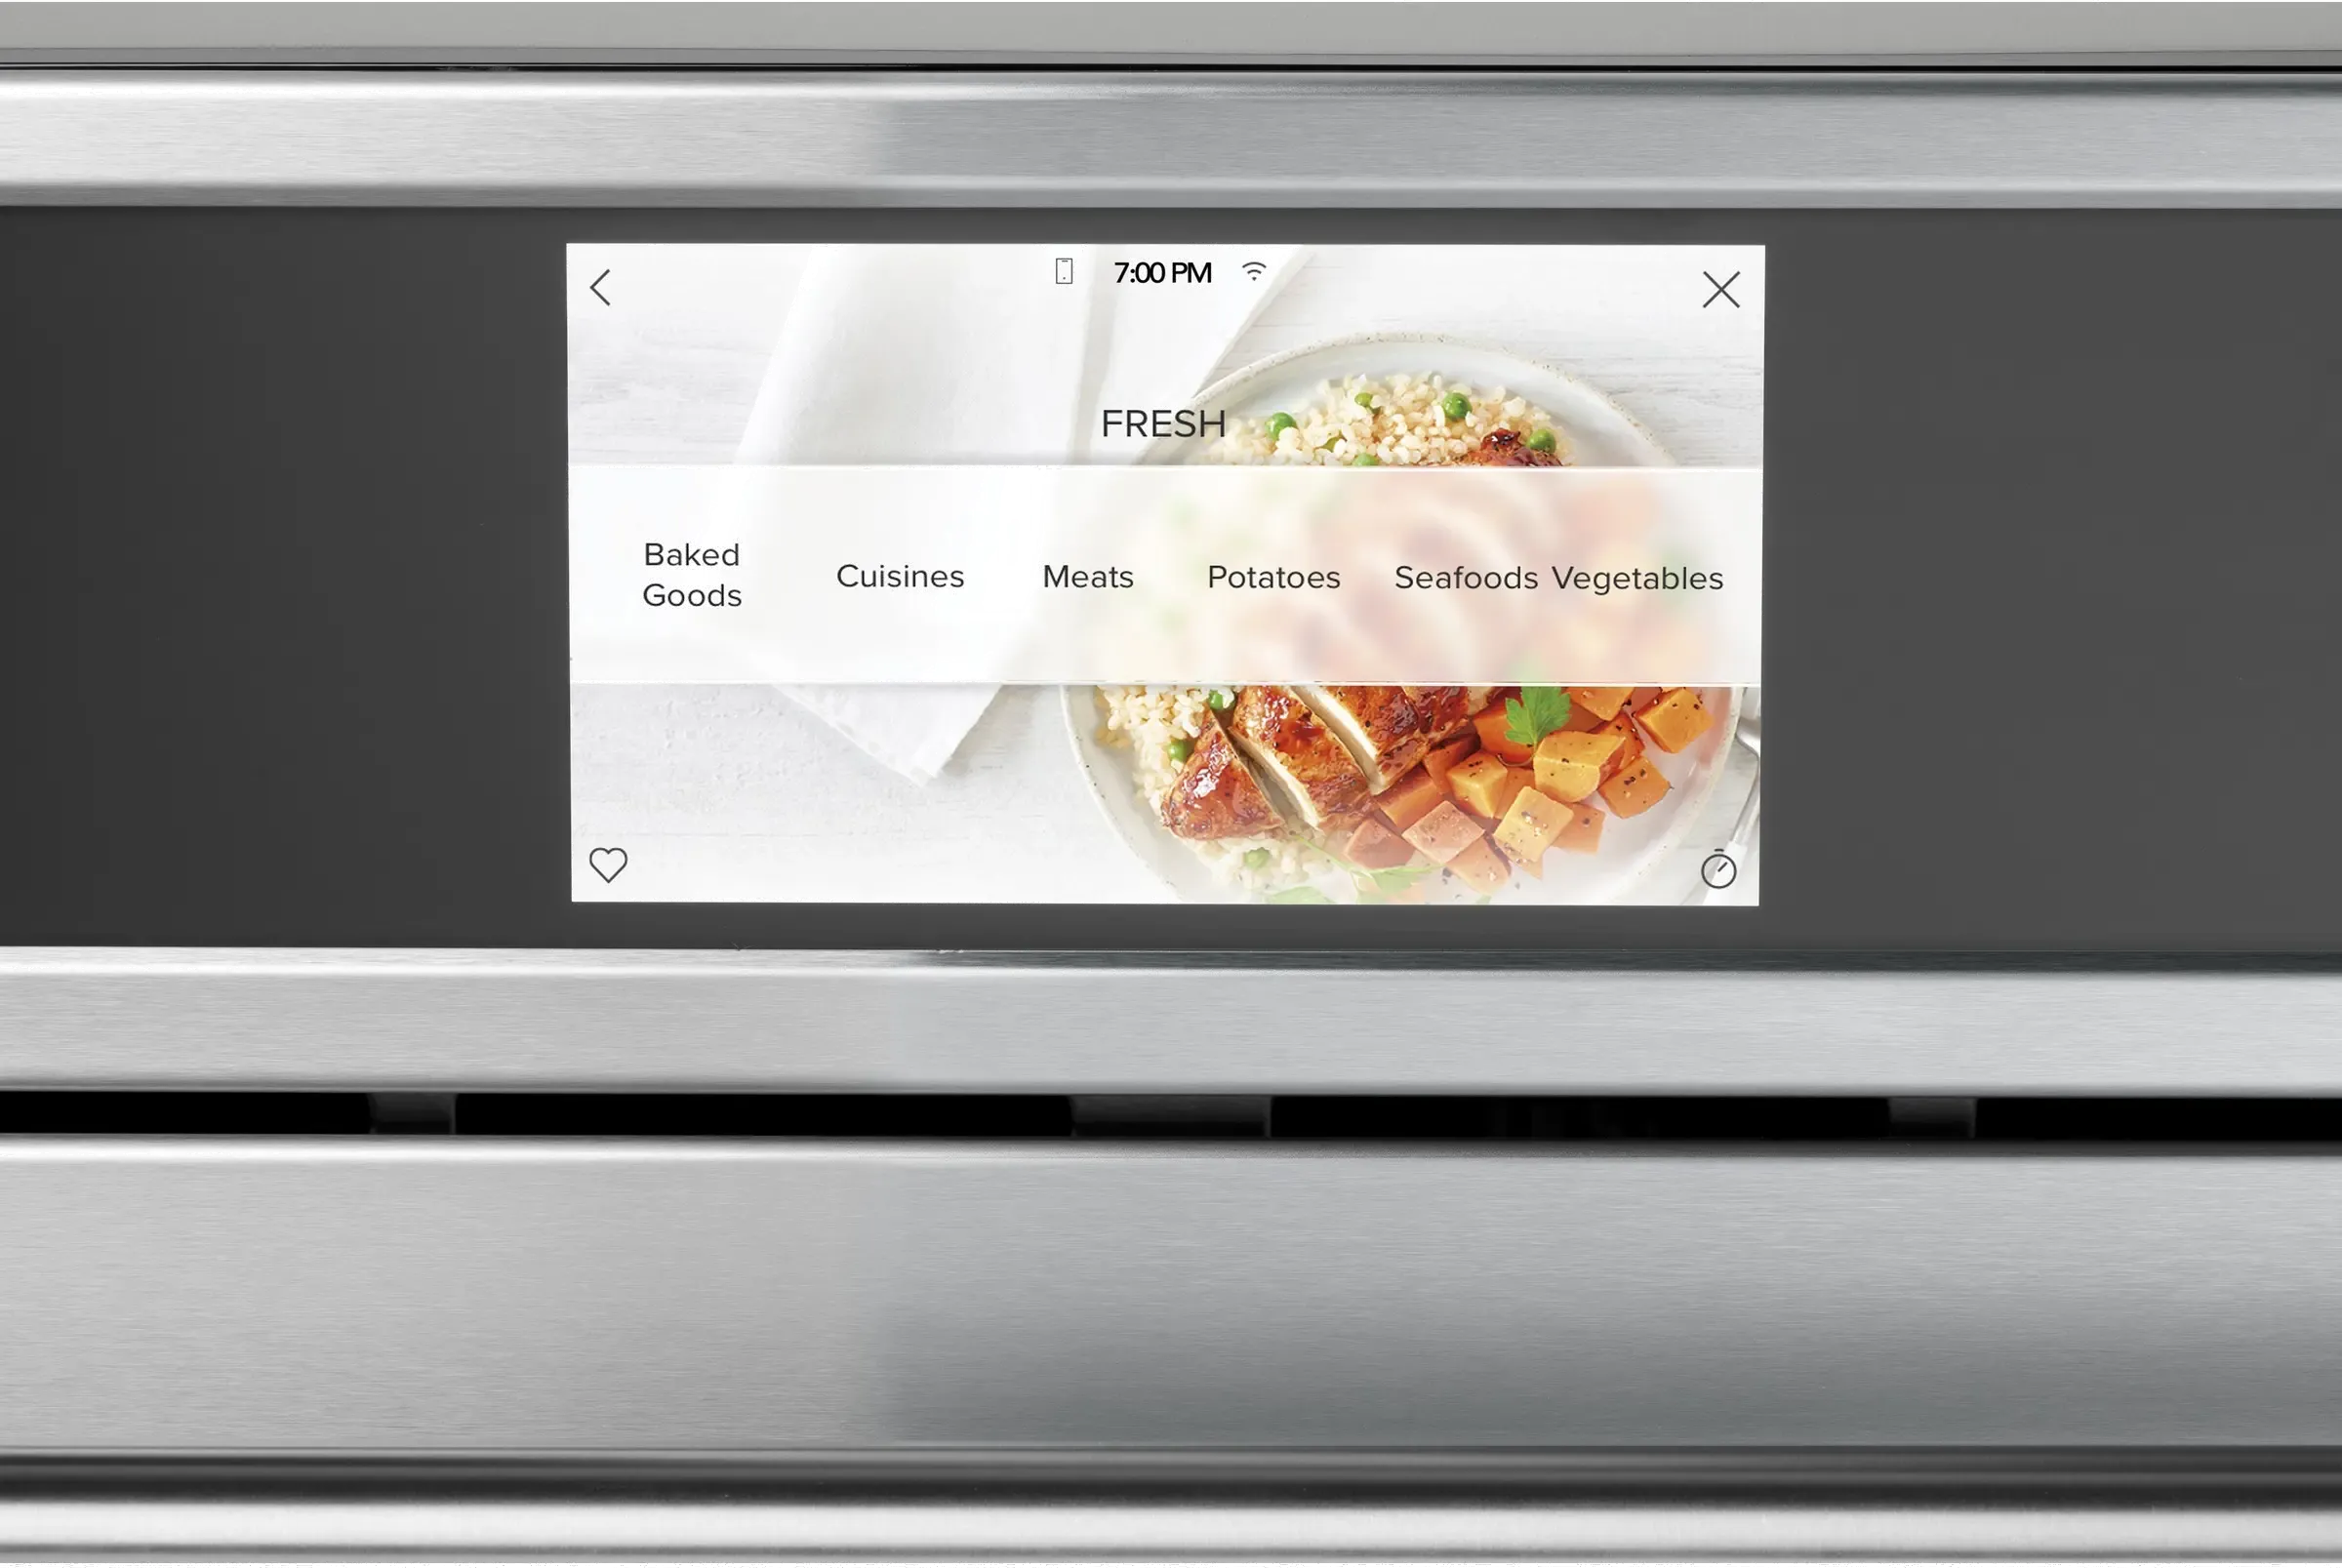 Cafe 5 in 1 Single Wall Oven CSB913P2NS1